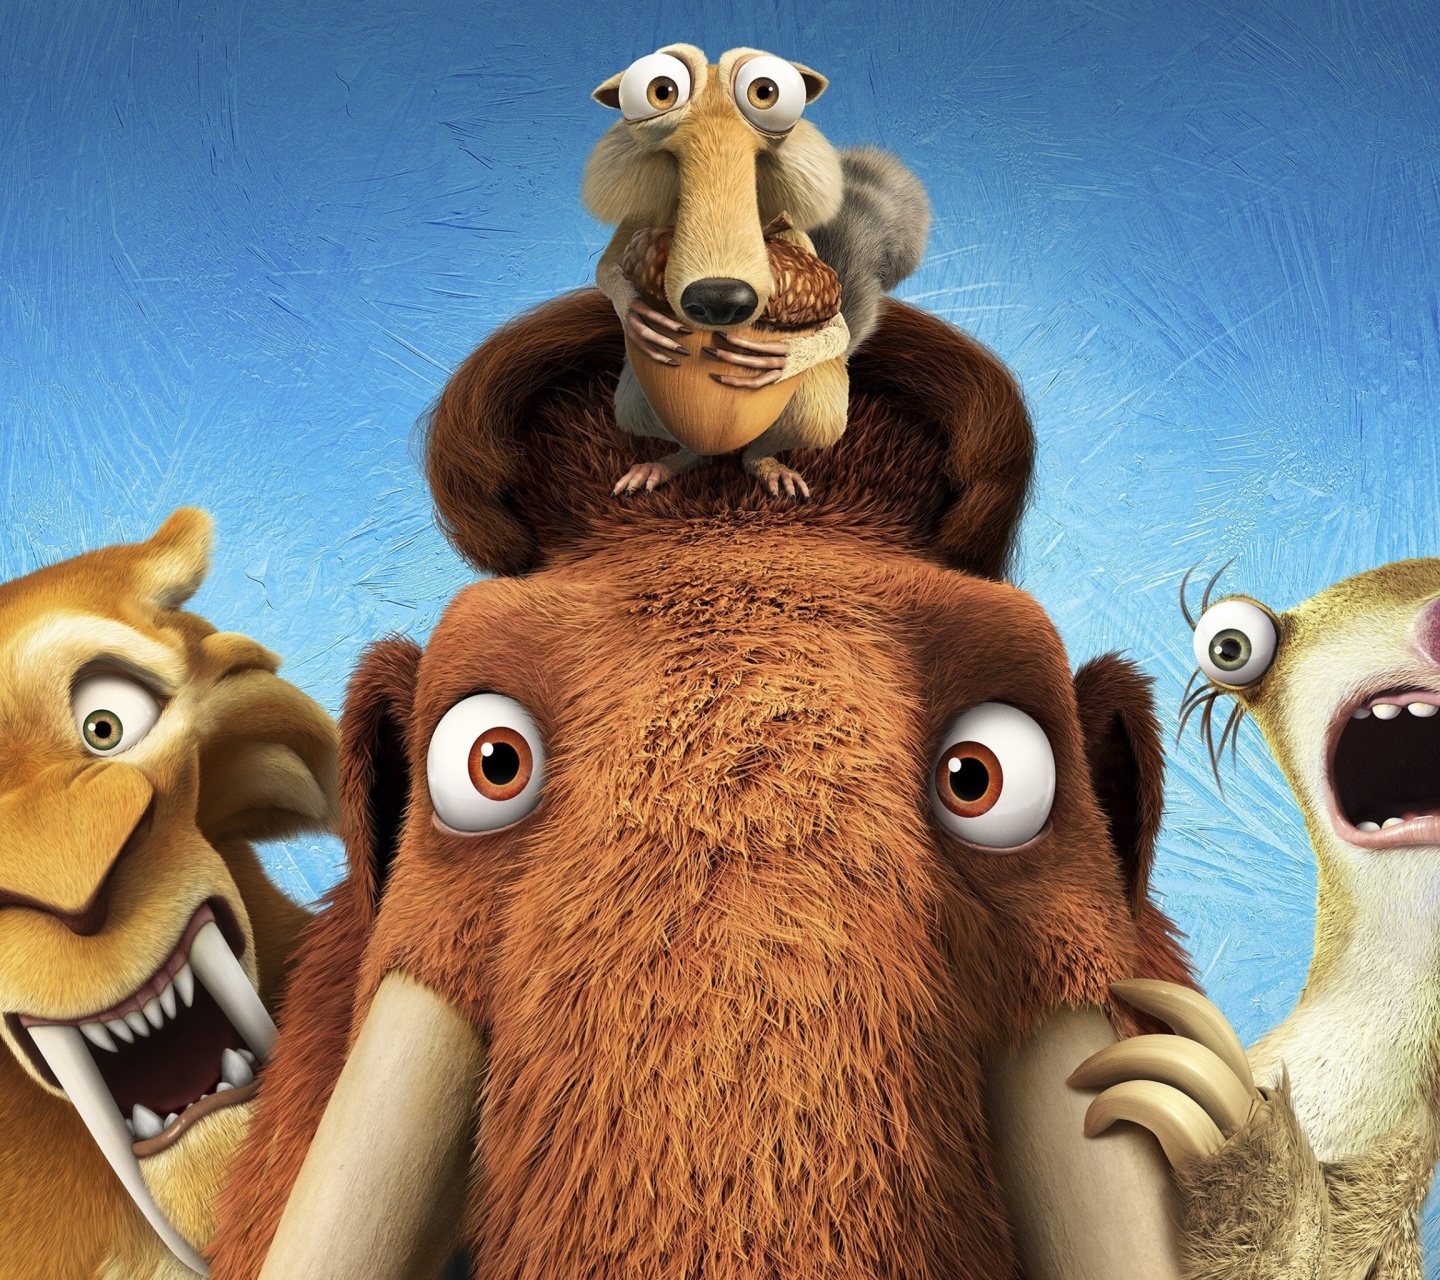 Ice Age 5 Collision Course with Diego, Manny, Scrat, Sid, Mammoths screenshot #1 1440x1280